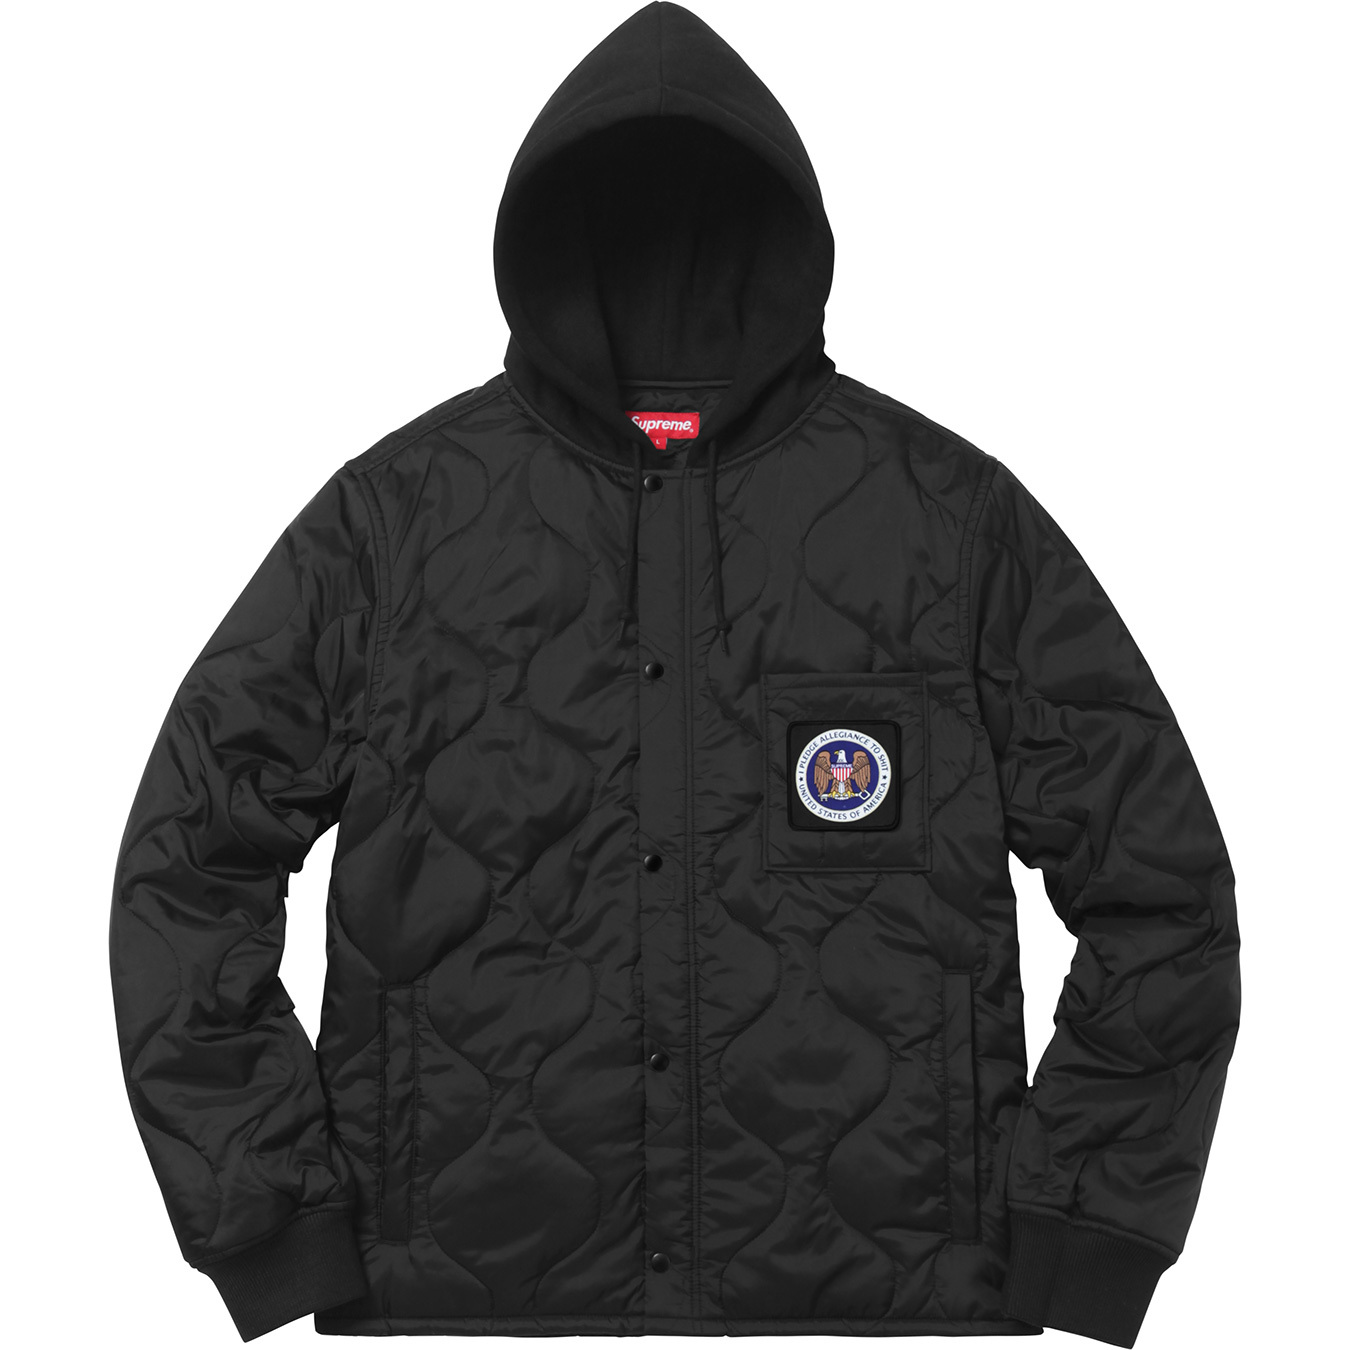 Supreme quilted liner hooded jacket S 新品体の厚みによるかもです